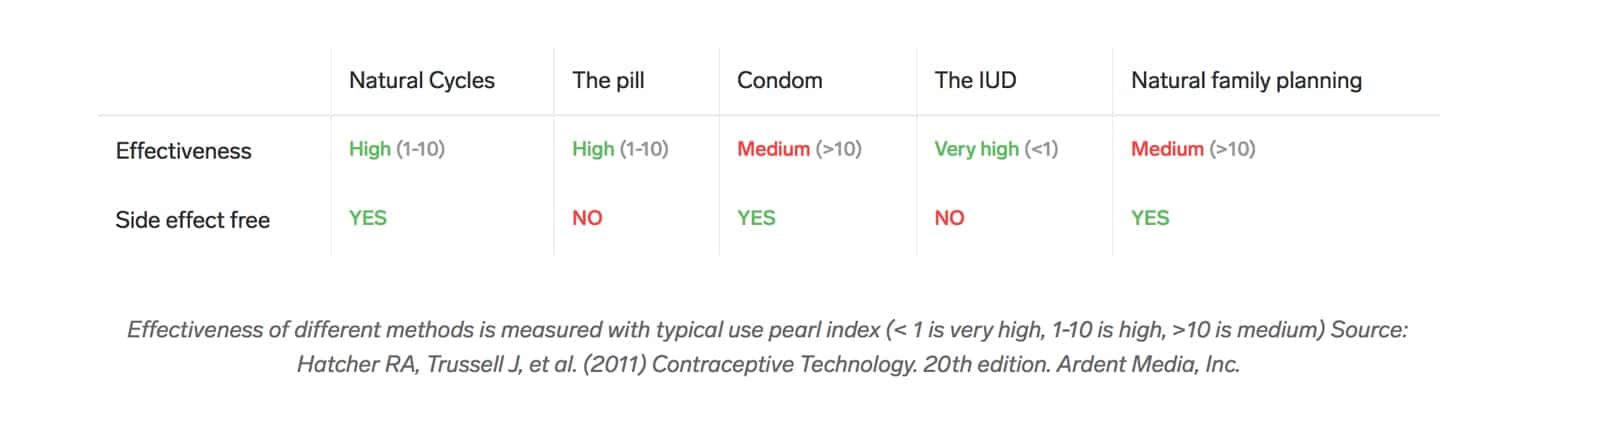 Comparing the effectiveness of the birth control app with other methods.